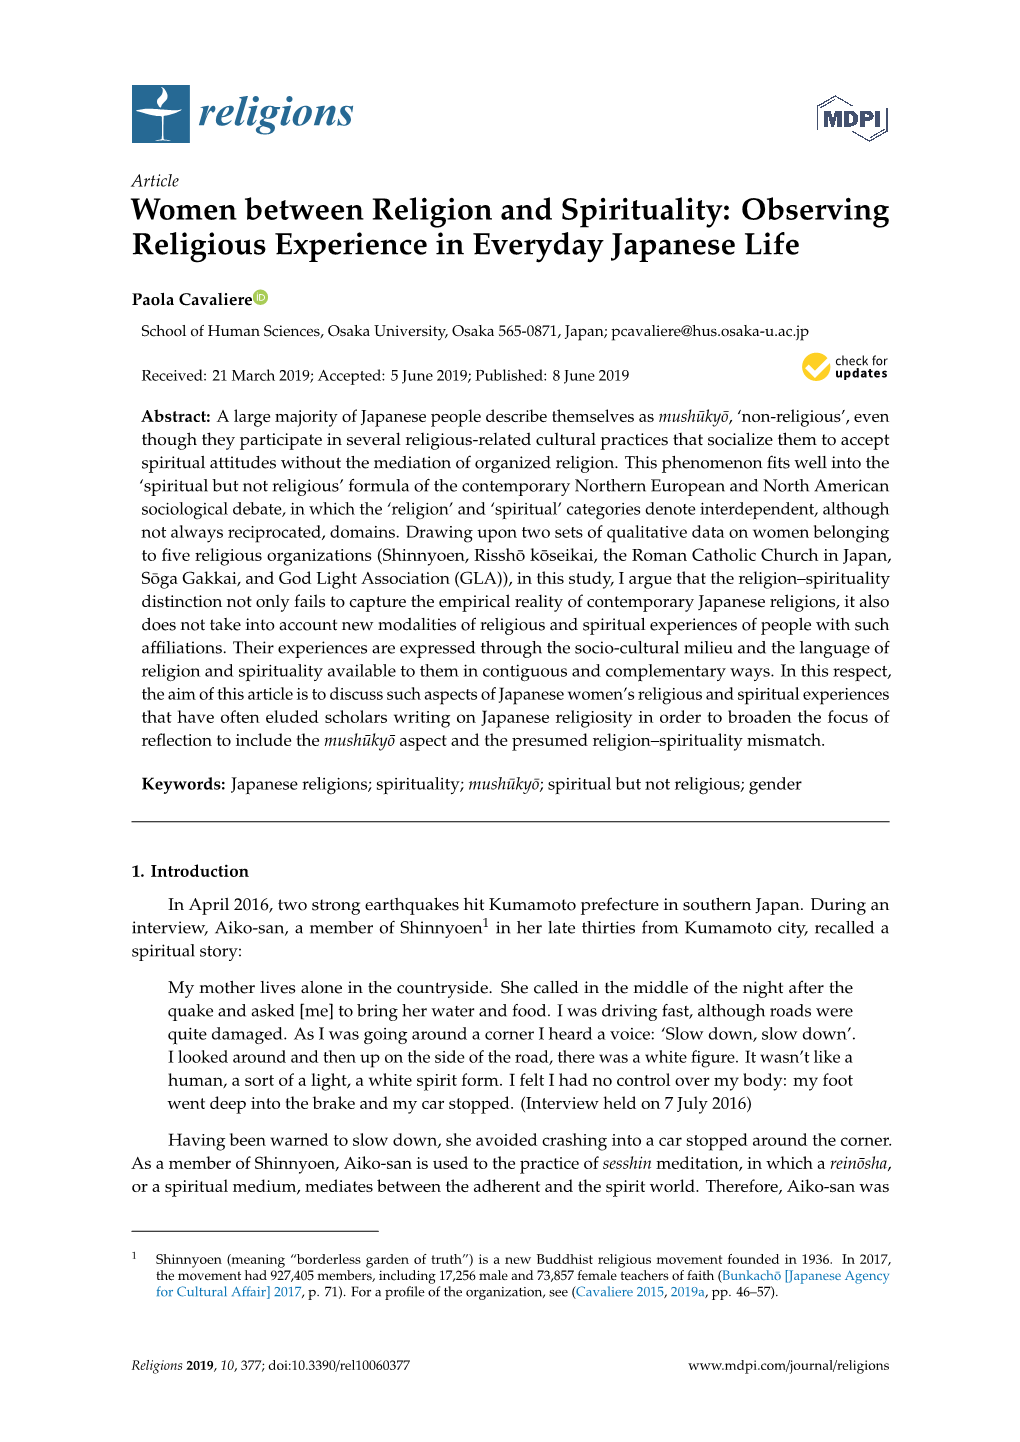 Women Between Religion and Spirituality: Observing Religious Experience in Everyday Japanese Life